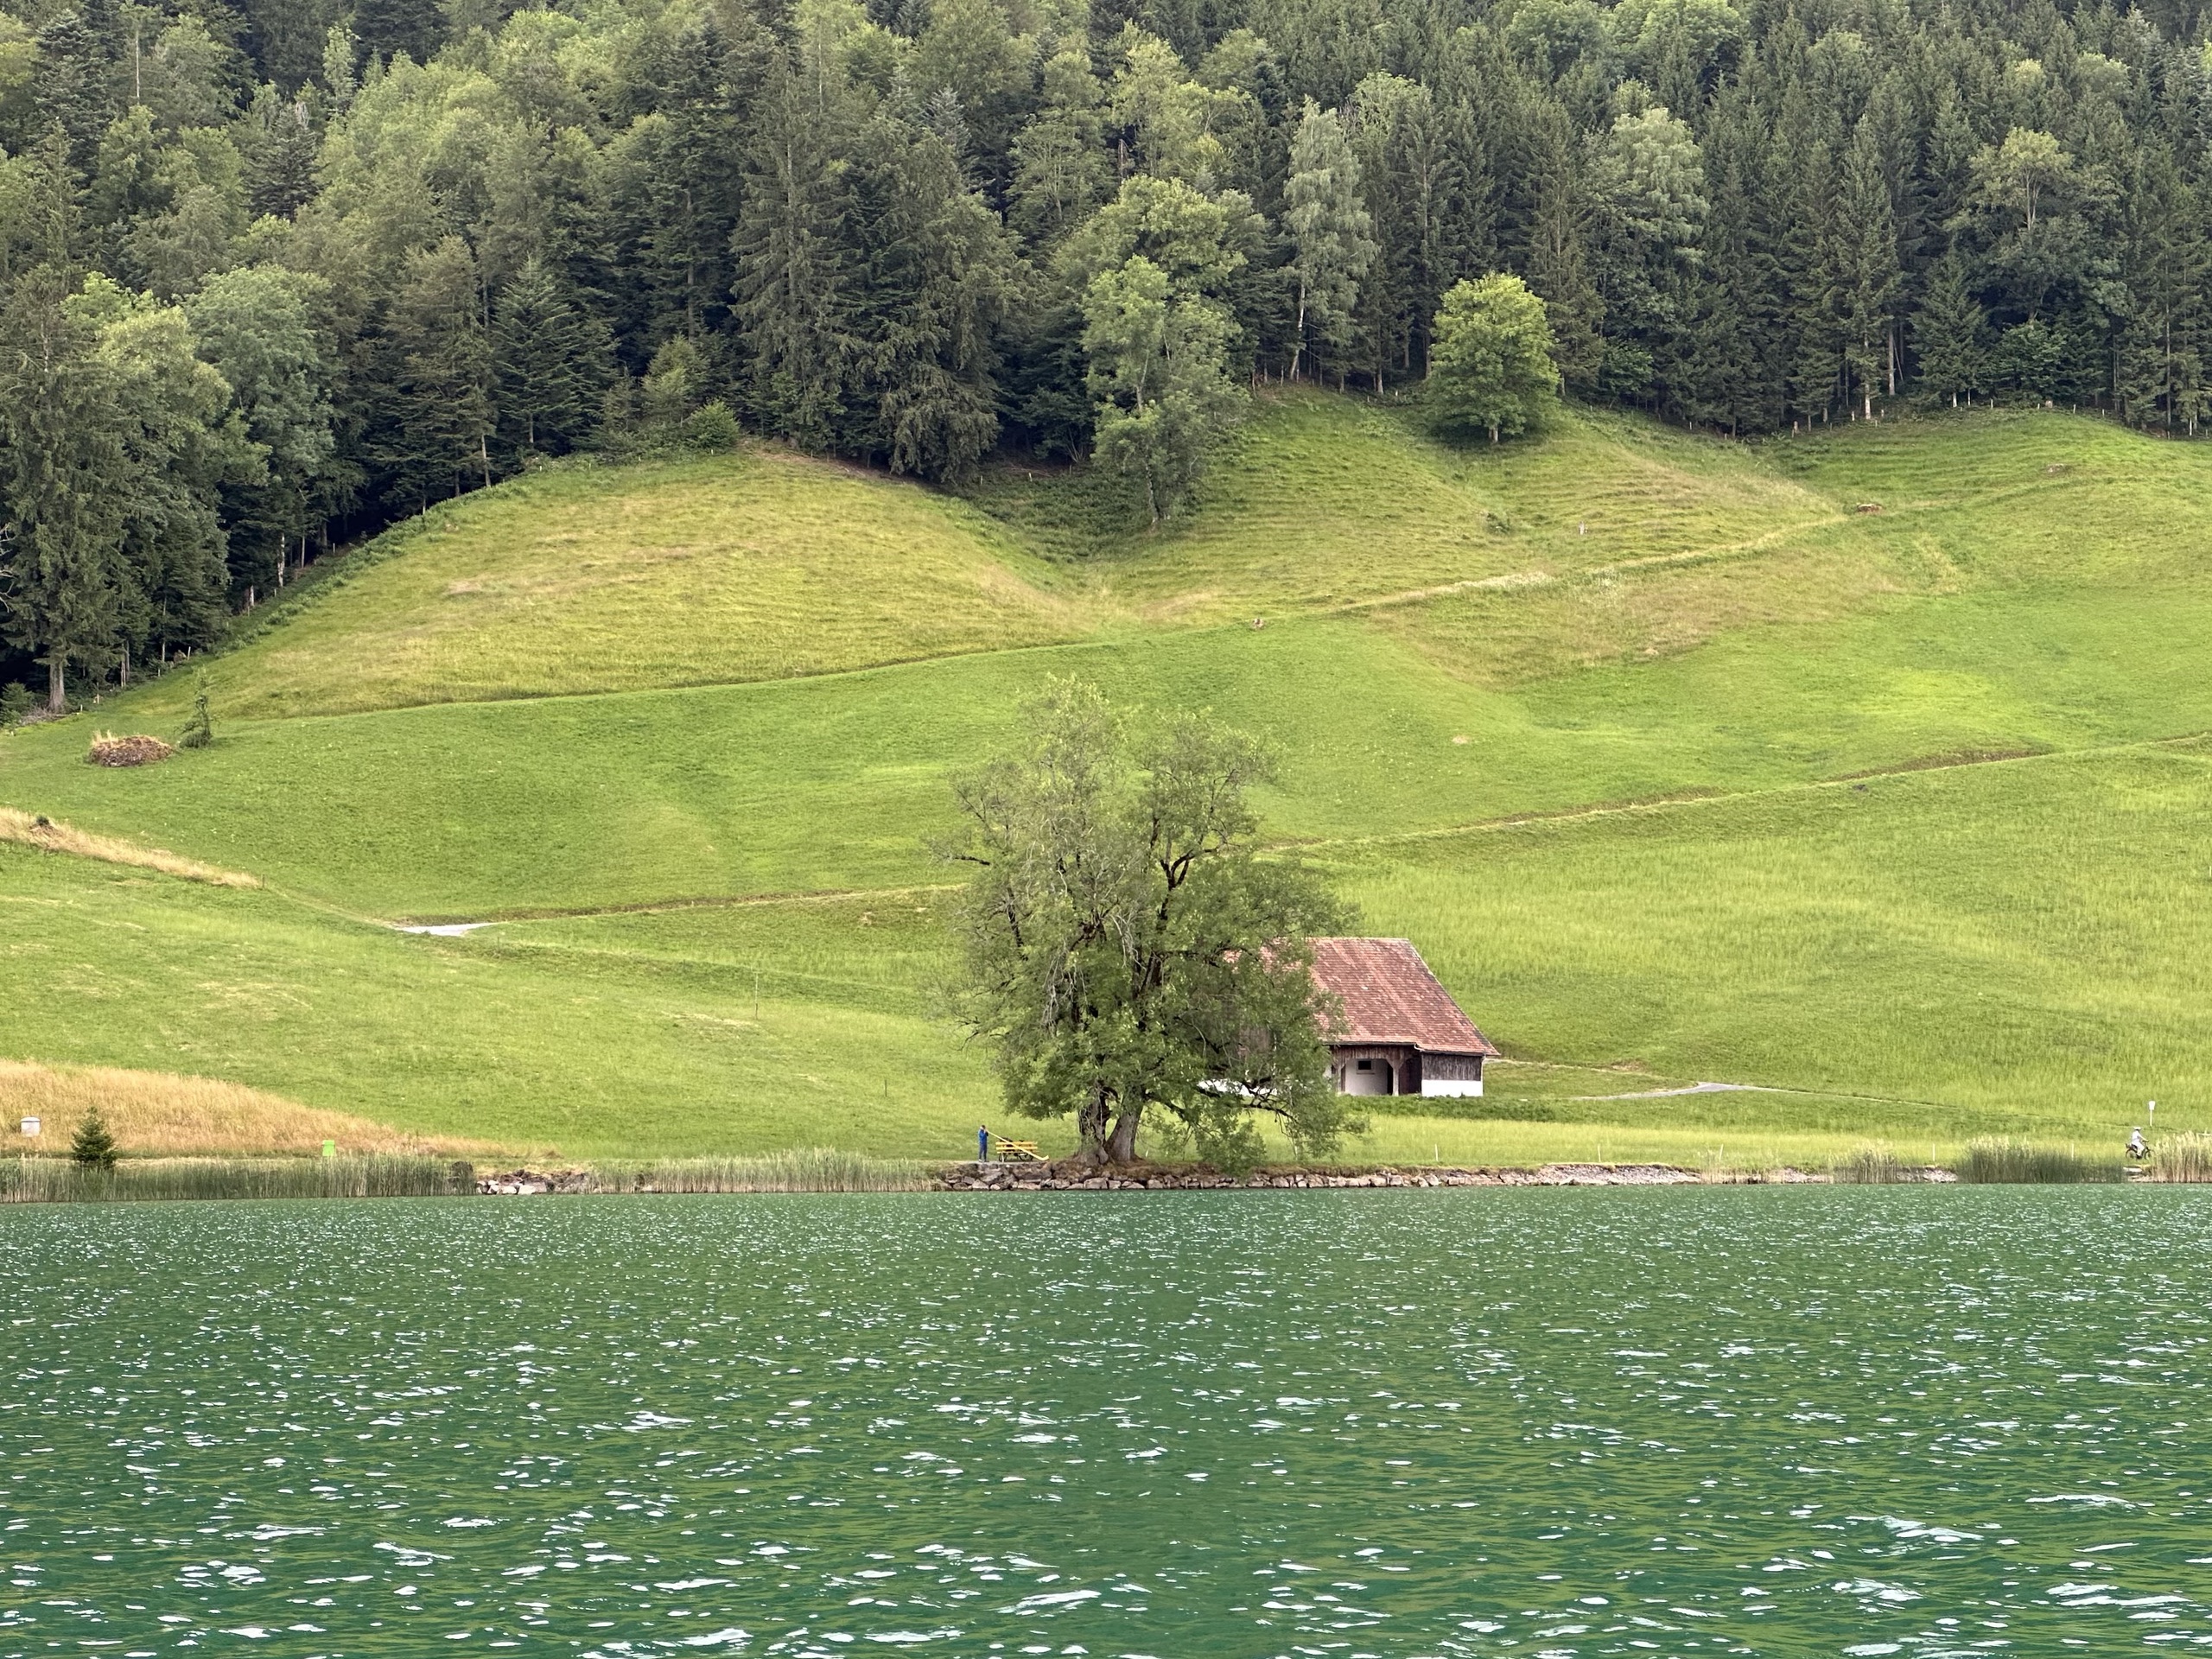 View of green hillside on the edge of the lake. A standing man plays a large alp horn beneath a tree.